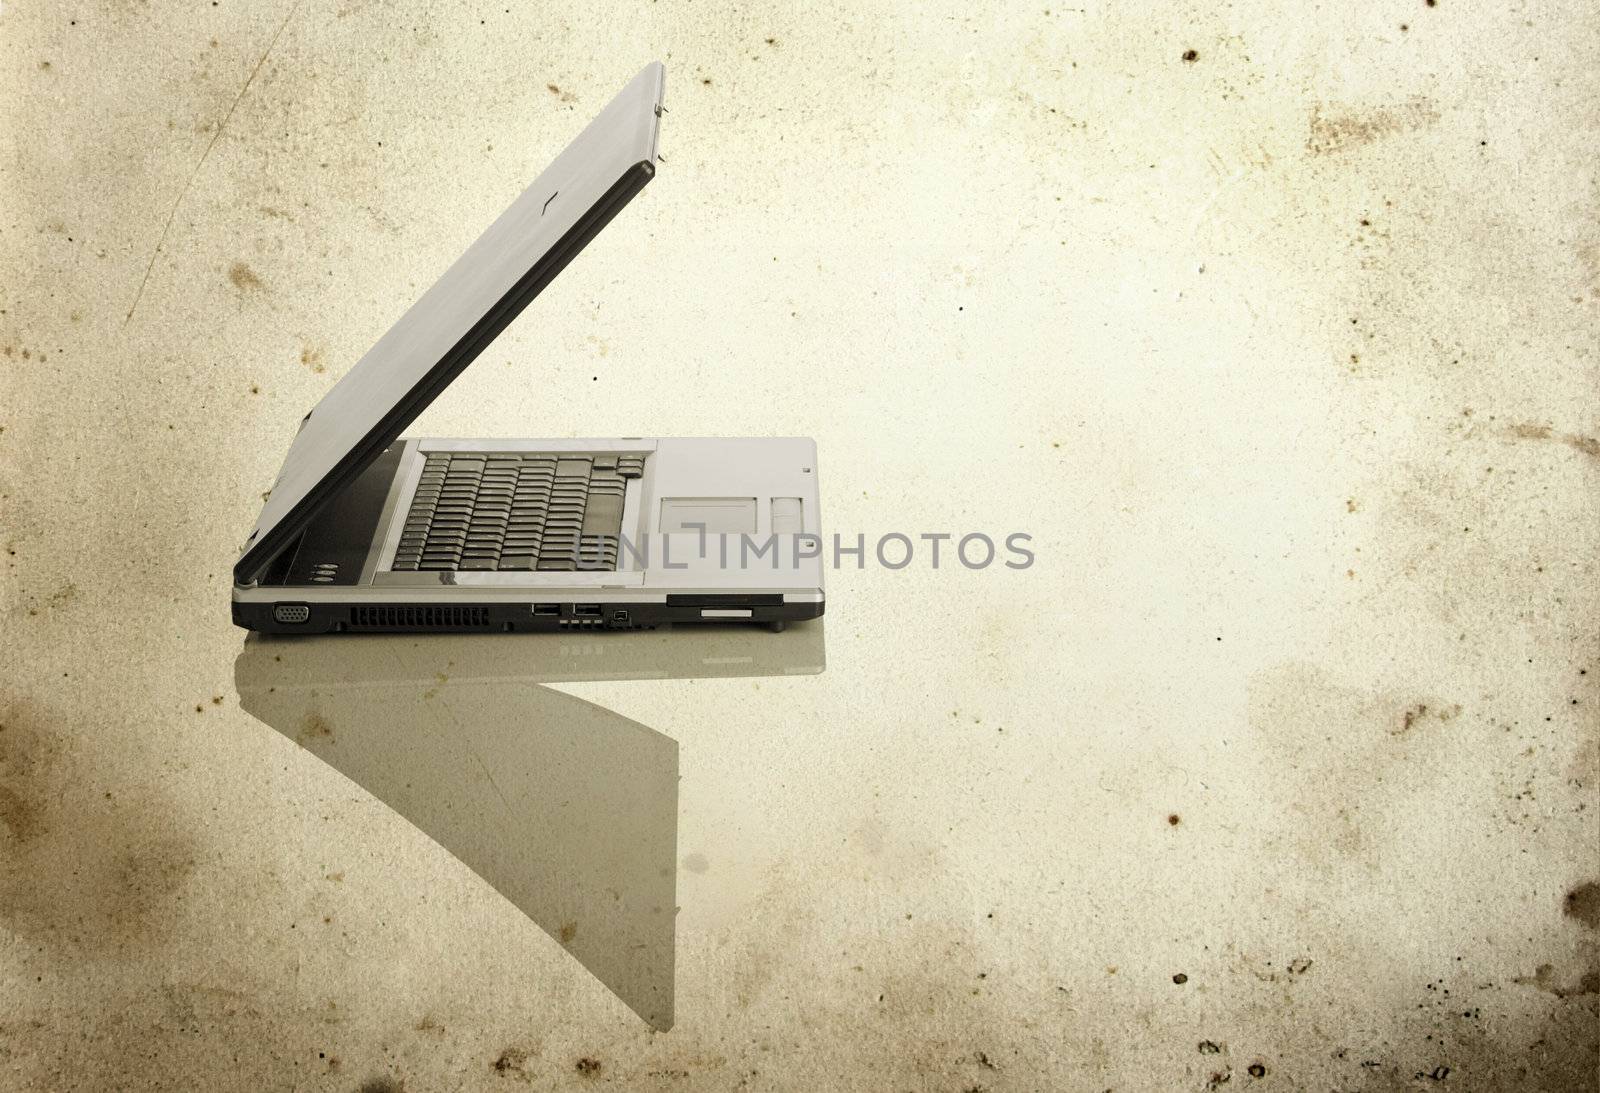 Picture of a laptop on a white background with a grunge background

